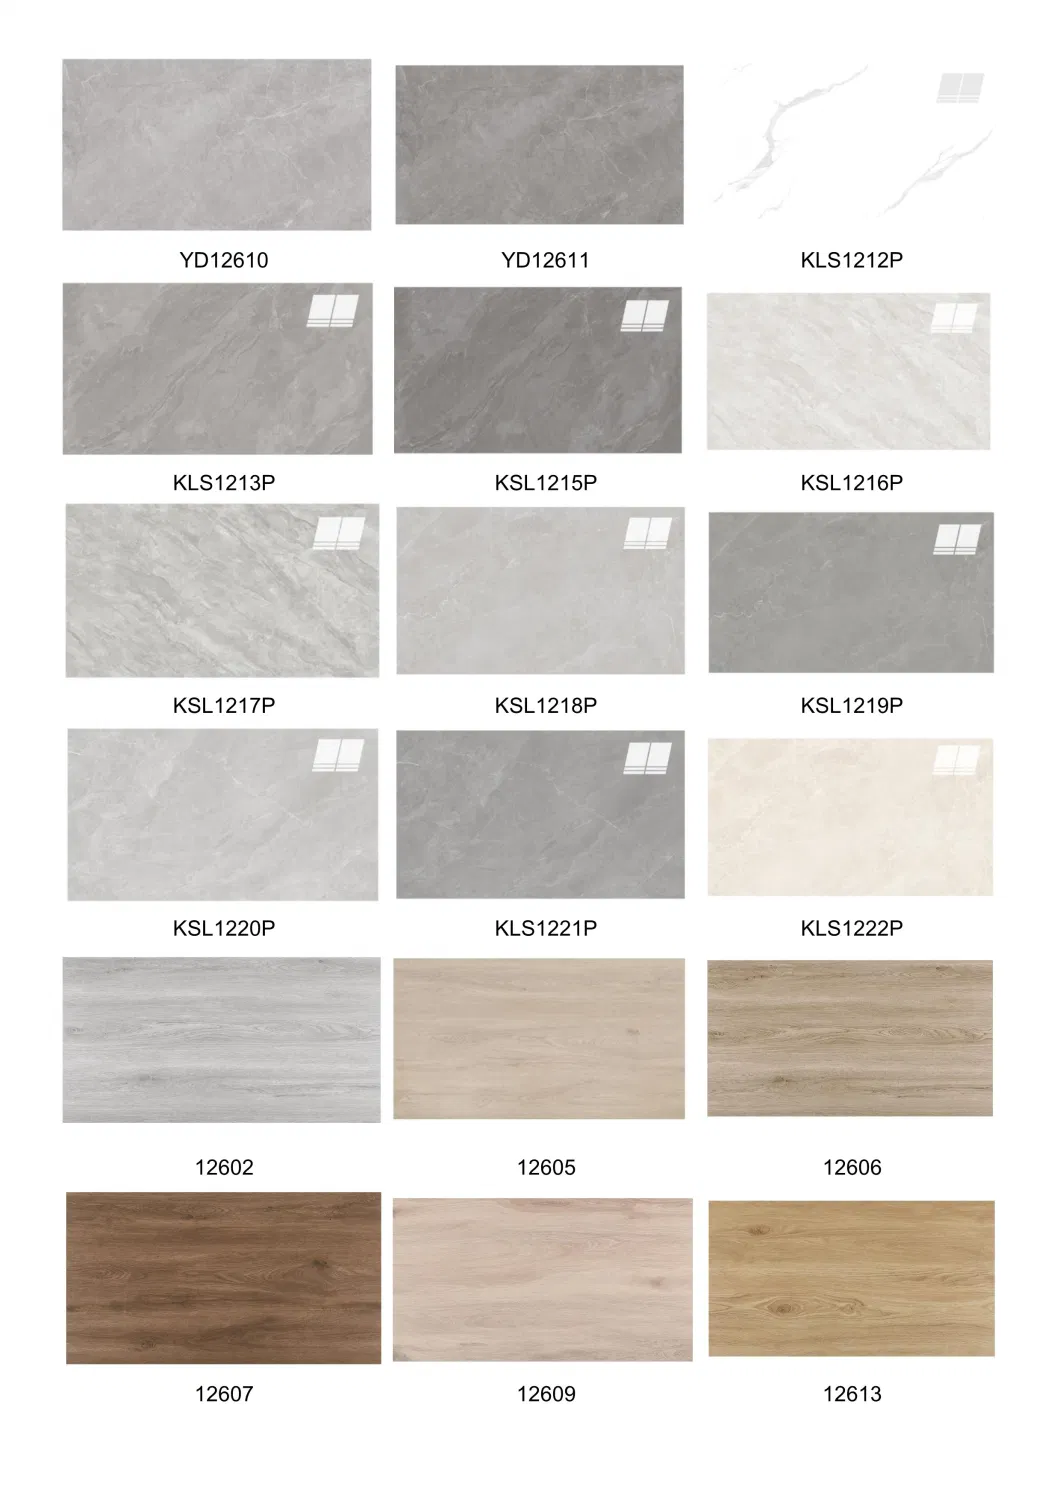 24X48 Glazed Polish Porcelain Tiles for Floor and Wall Building Material